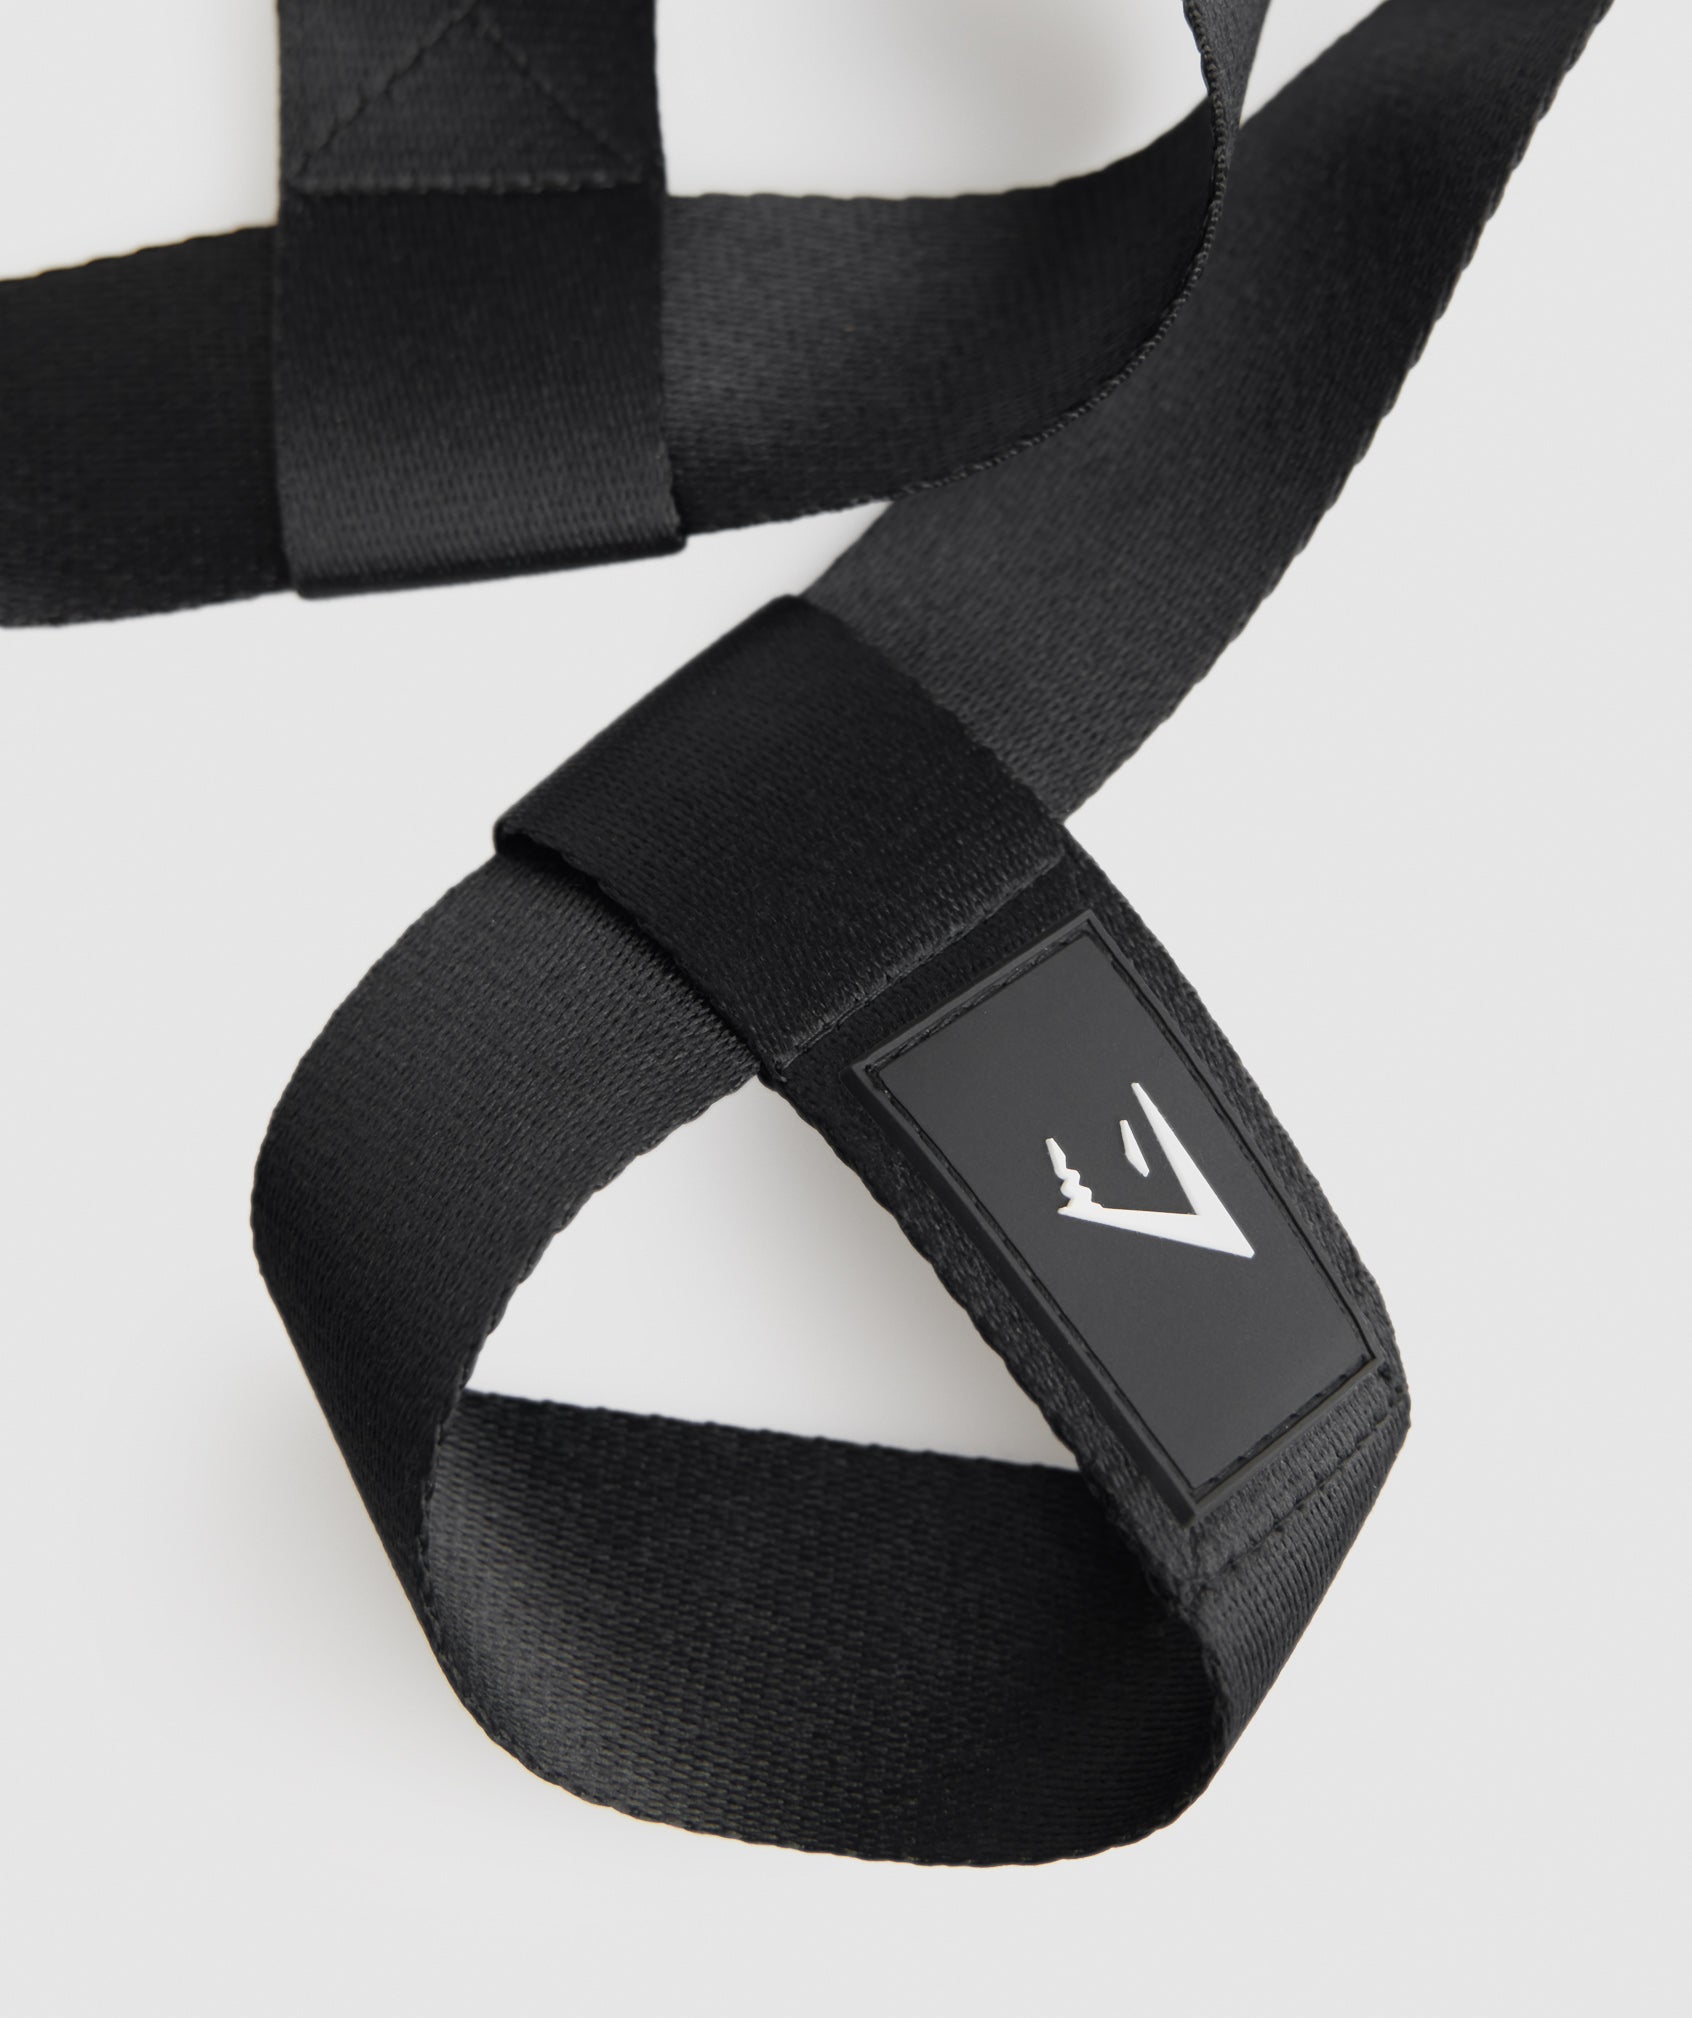 Studio Mat Strap and Band in Black - view 3